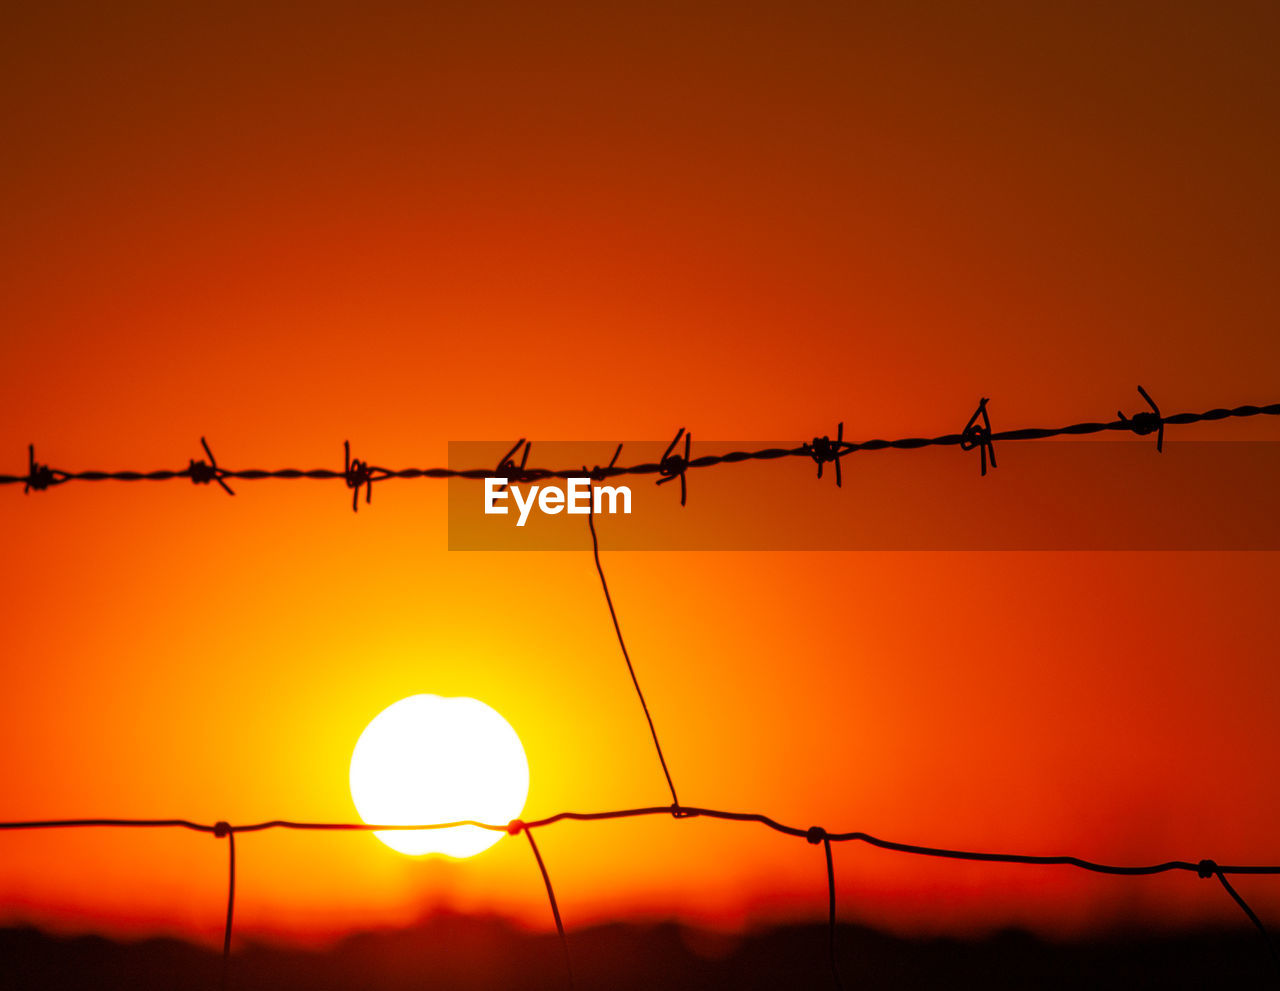 SILHOUETTE OF BARBED WIRE AGAINST ORANGE SKY